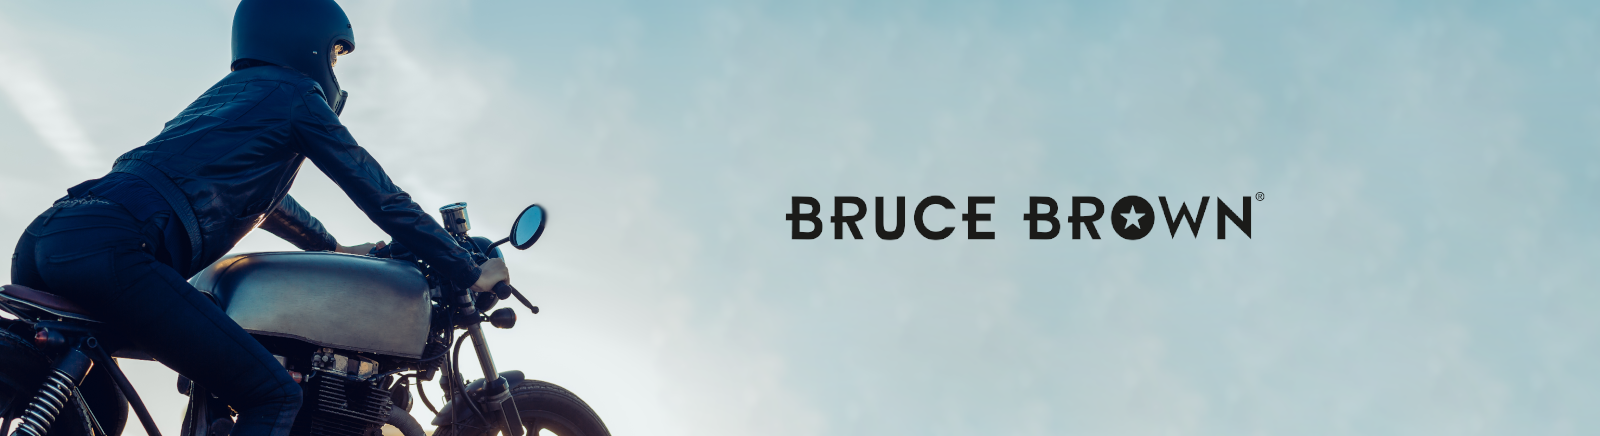 Bruce Brown Schuhe kaufen &#9654; The American Way of Life | GISY